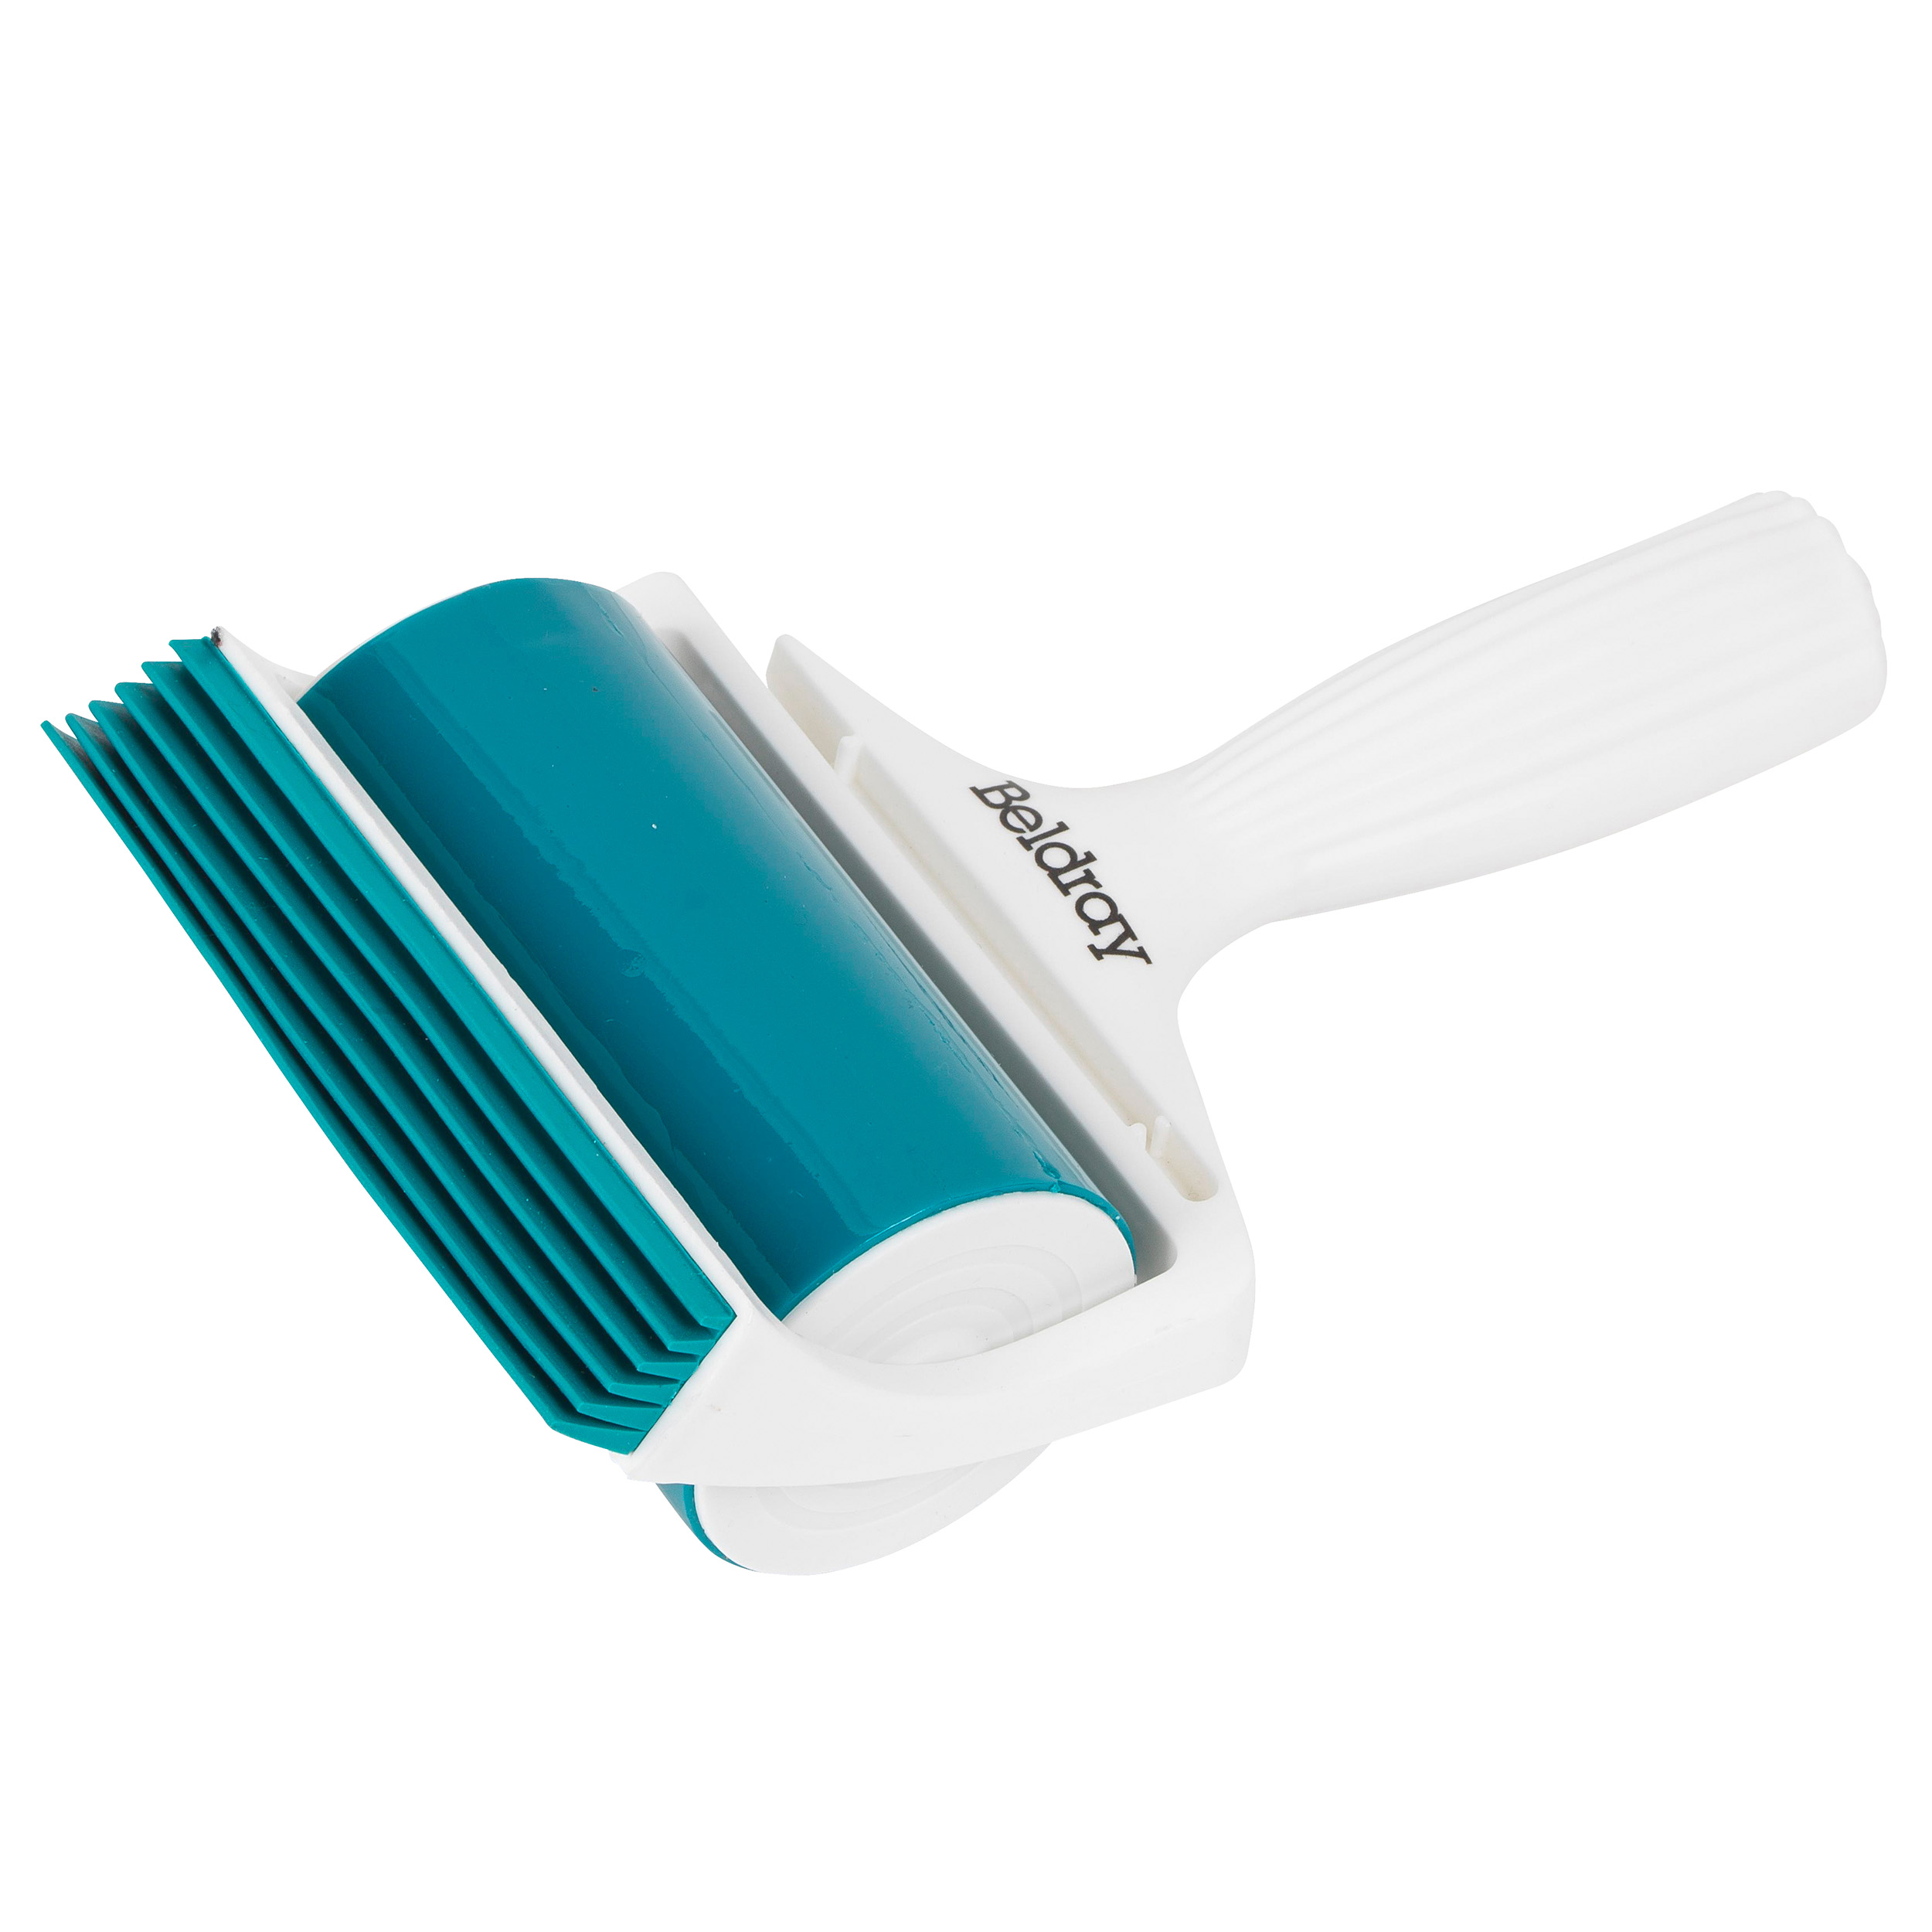 A Beldray Pet Plus Gel Lint Roller on a white background